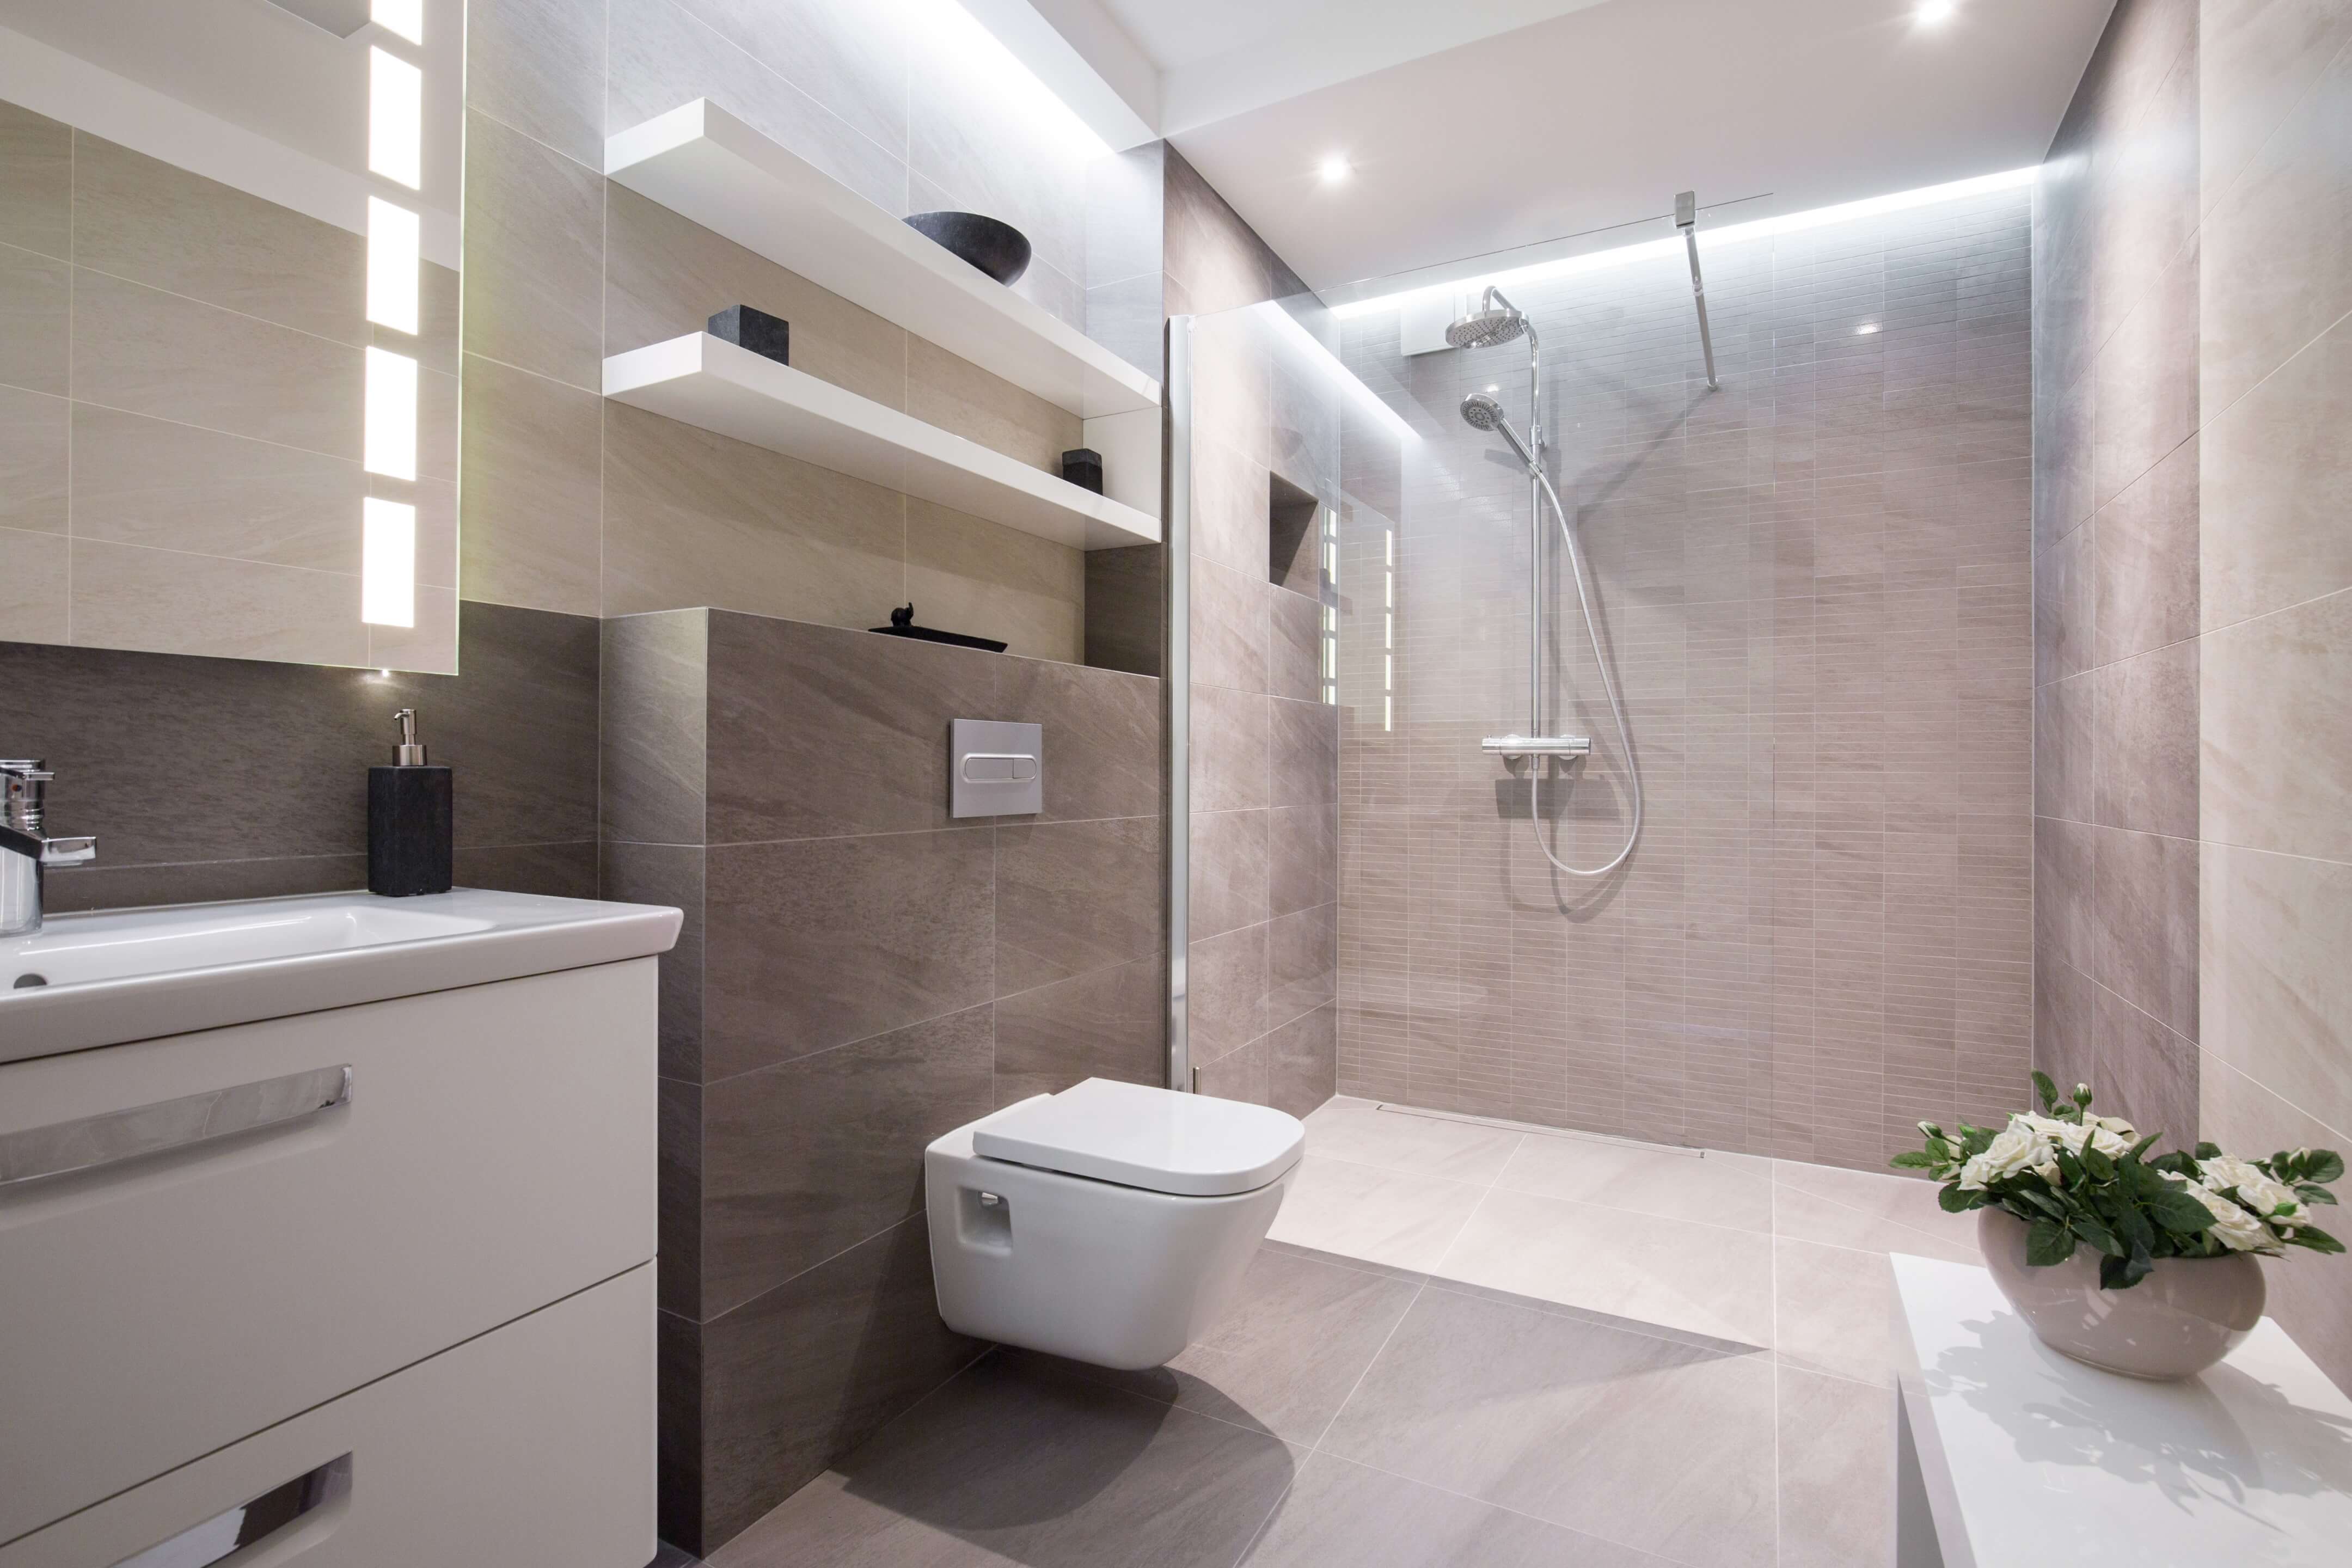 local bathroom fitters brentwood